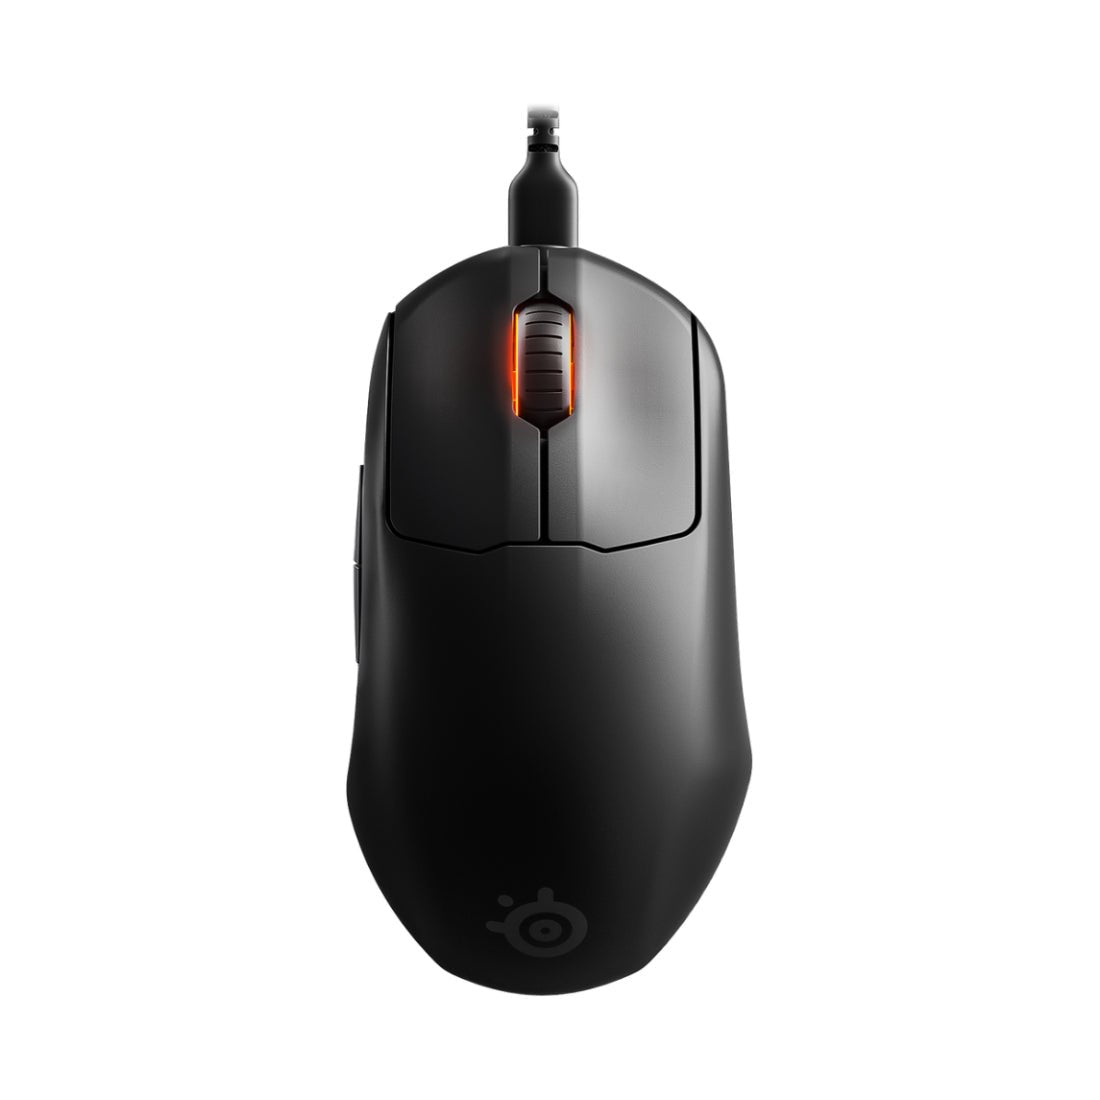 SteelSeries Prime Mini 18000DPI Wired Gaming Mouse - Black - فأرة - Store 974 | ستور ٩٧٤